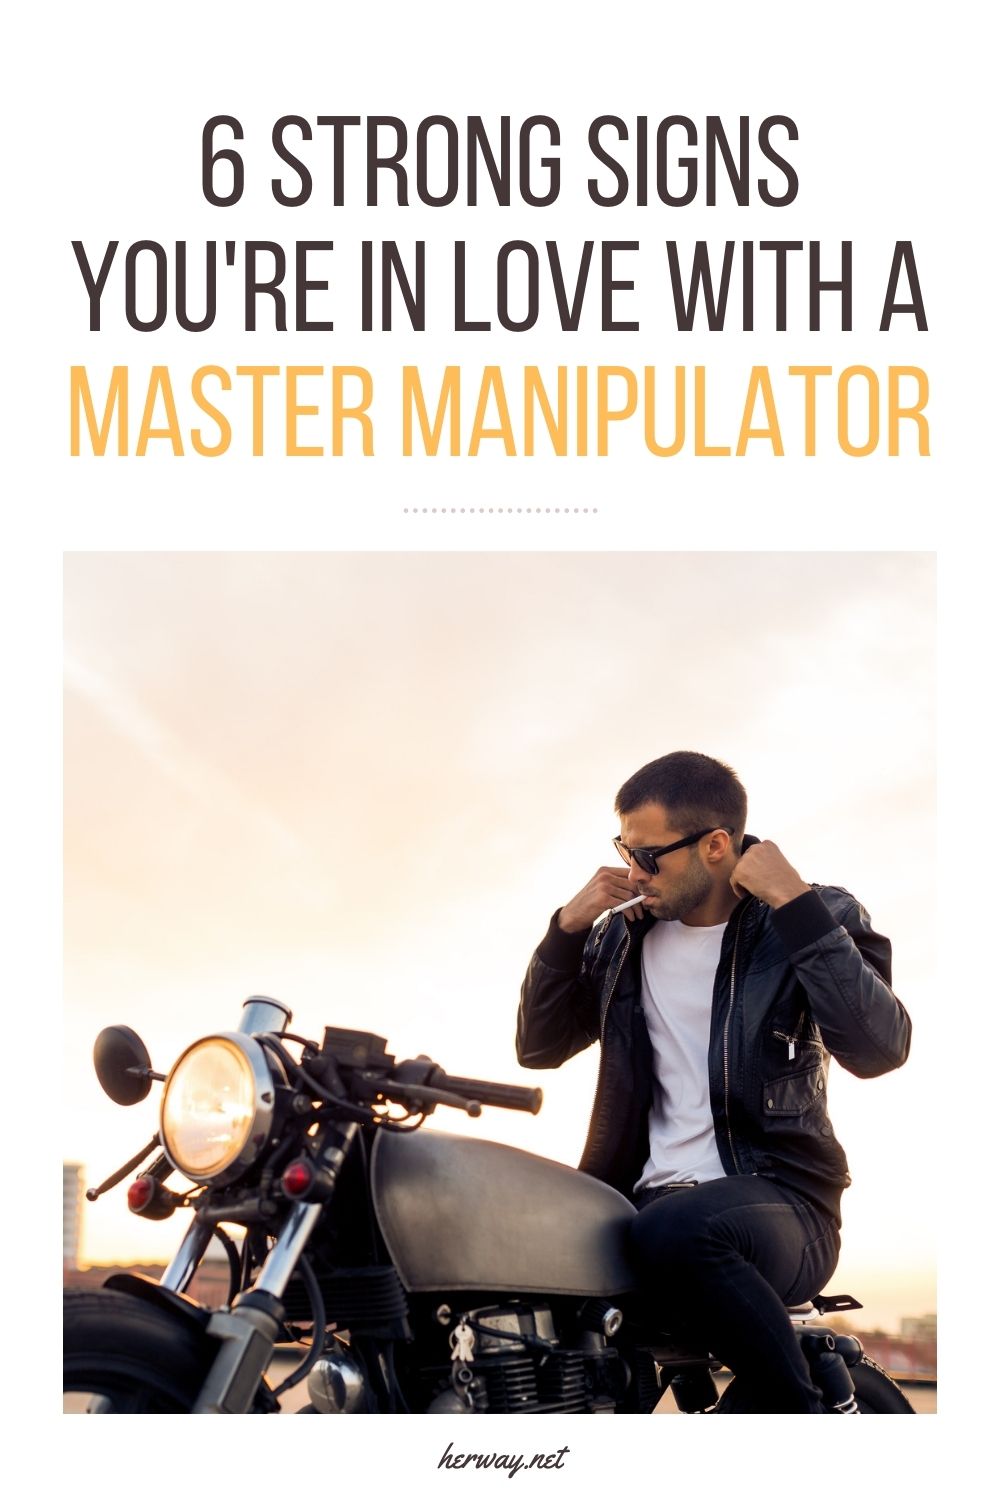 6 Strong Signs You're In Love With A Master Manipulator